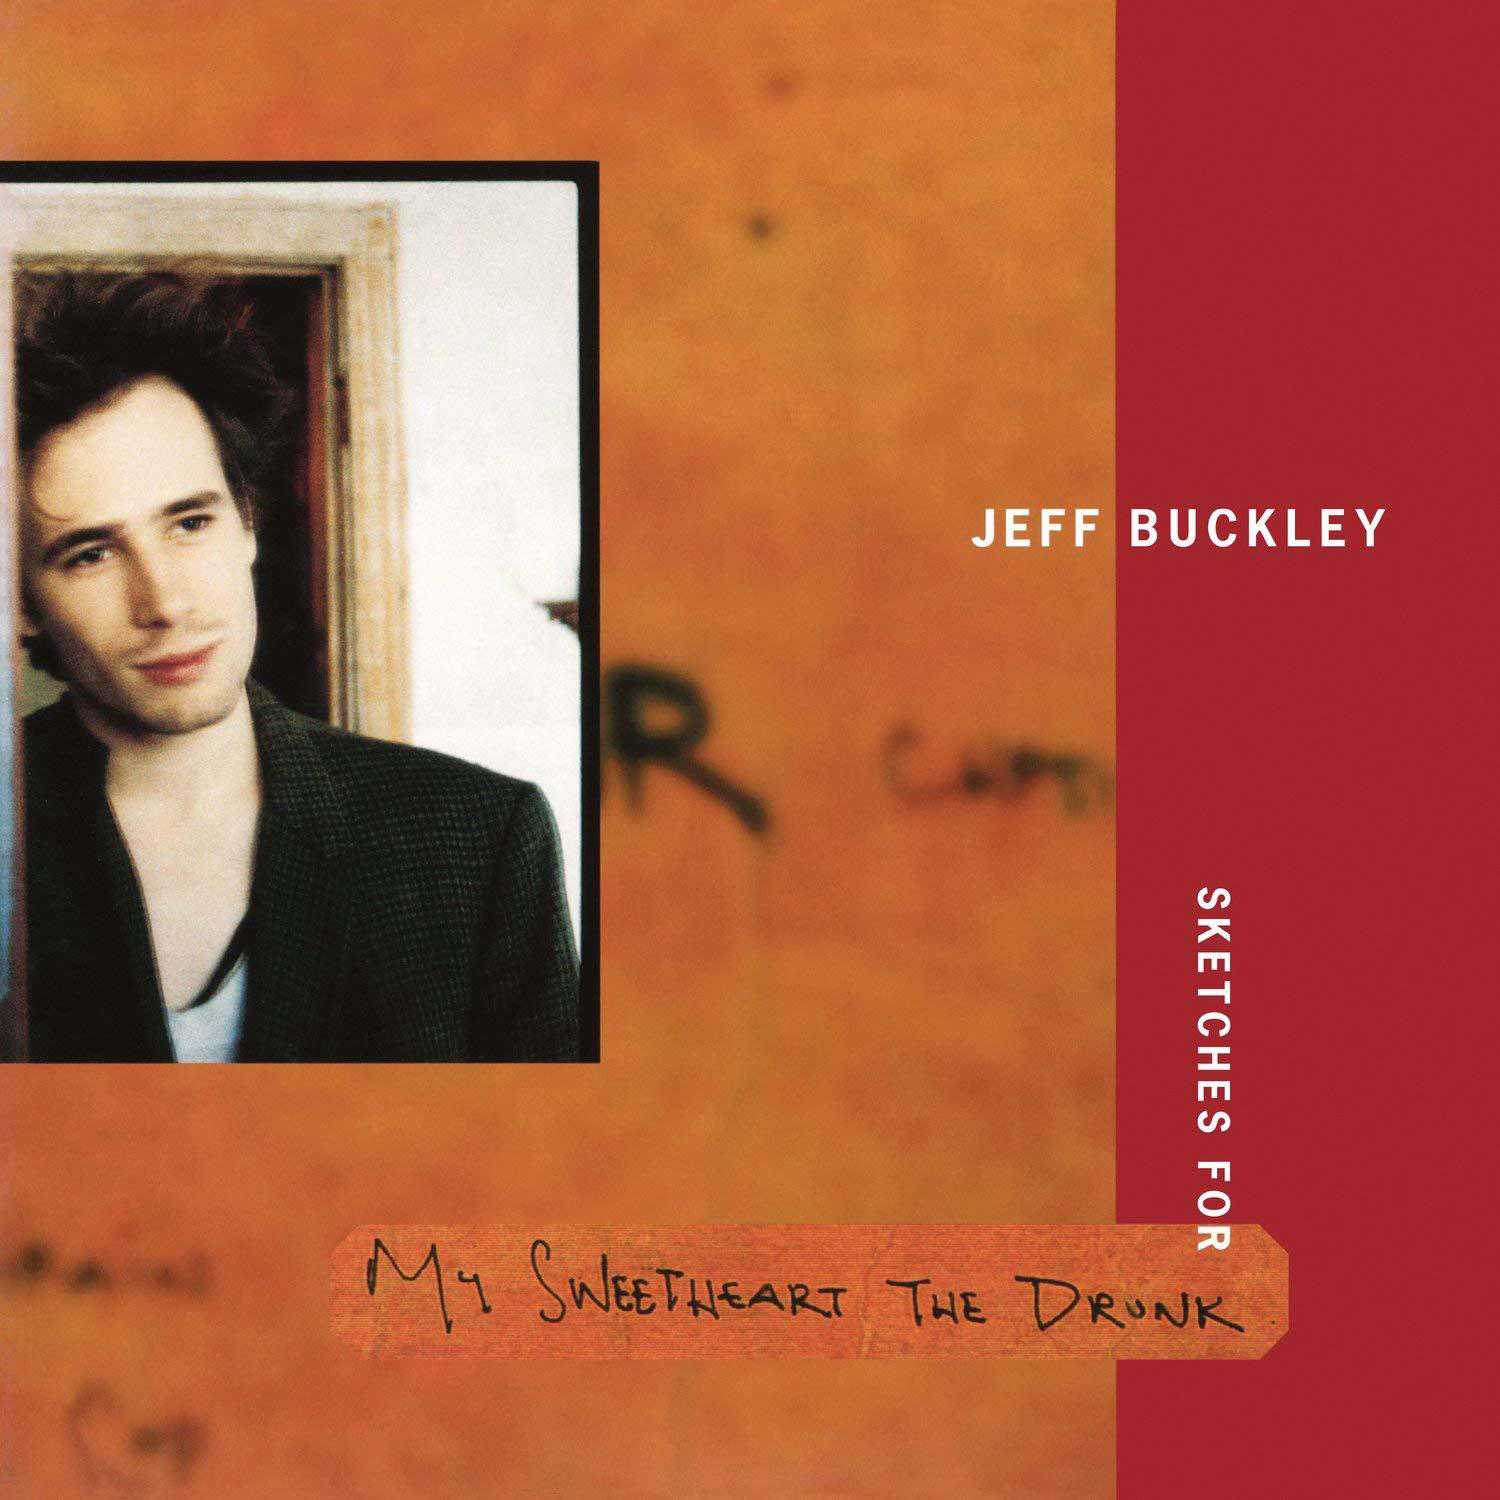 Jeff Buckley - Sketches The Sweetheart - Drunk My (Vinyl) for